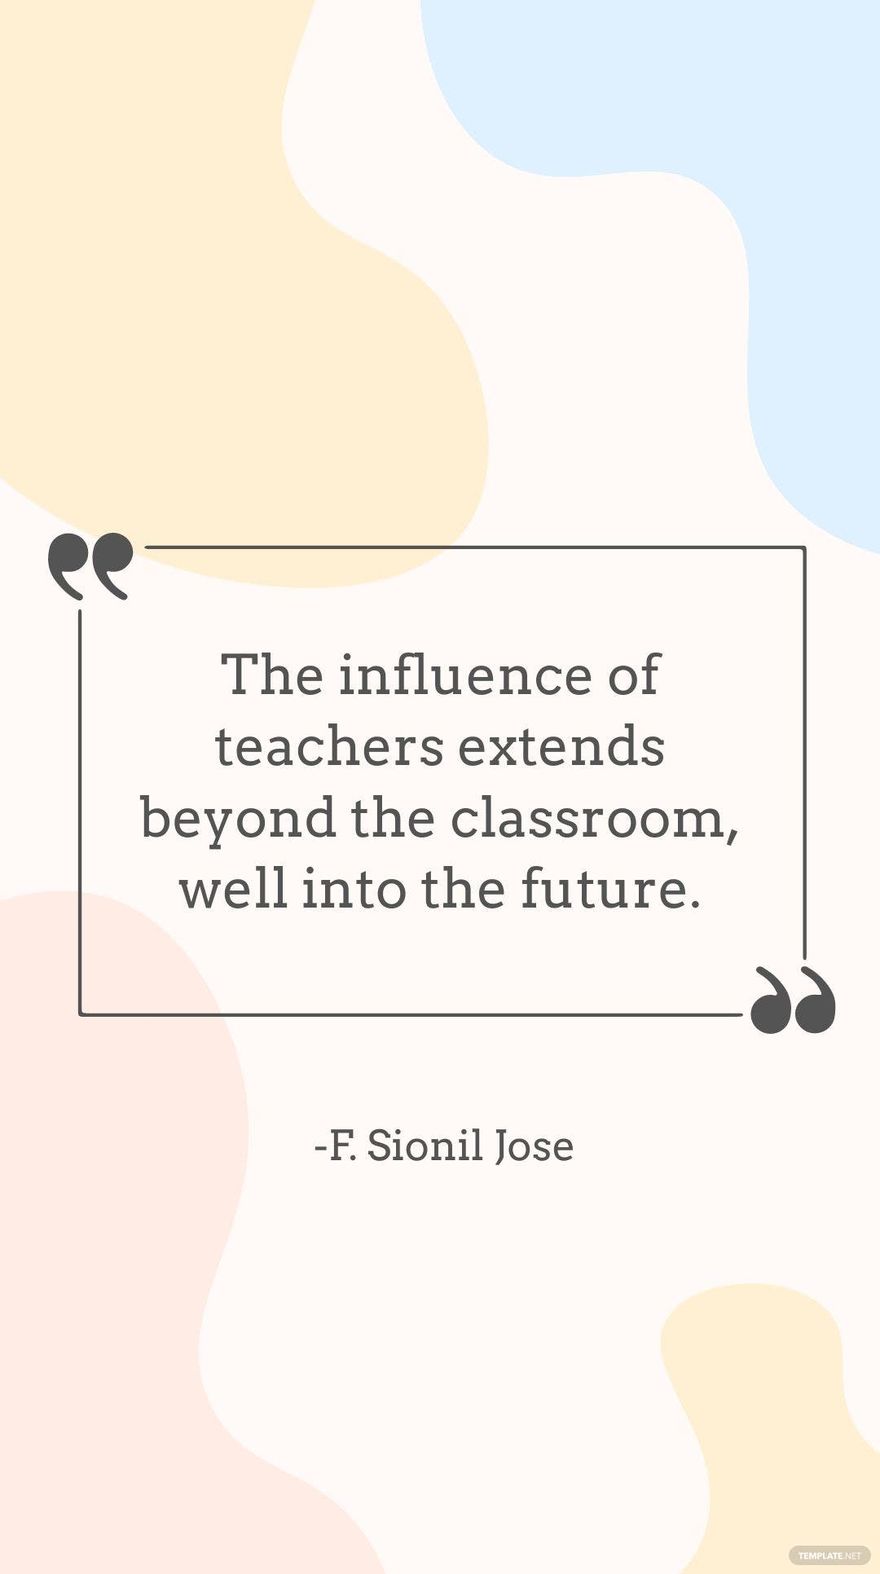 Free F. Sionil Jose - The influence of teachers extends beyond the classroom, well into the future. in JPG